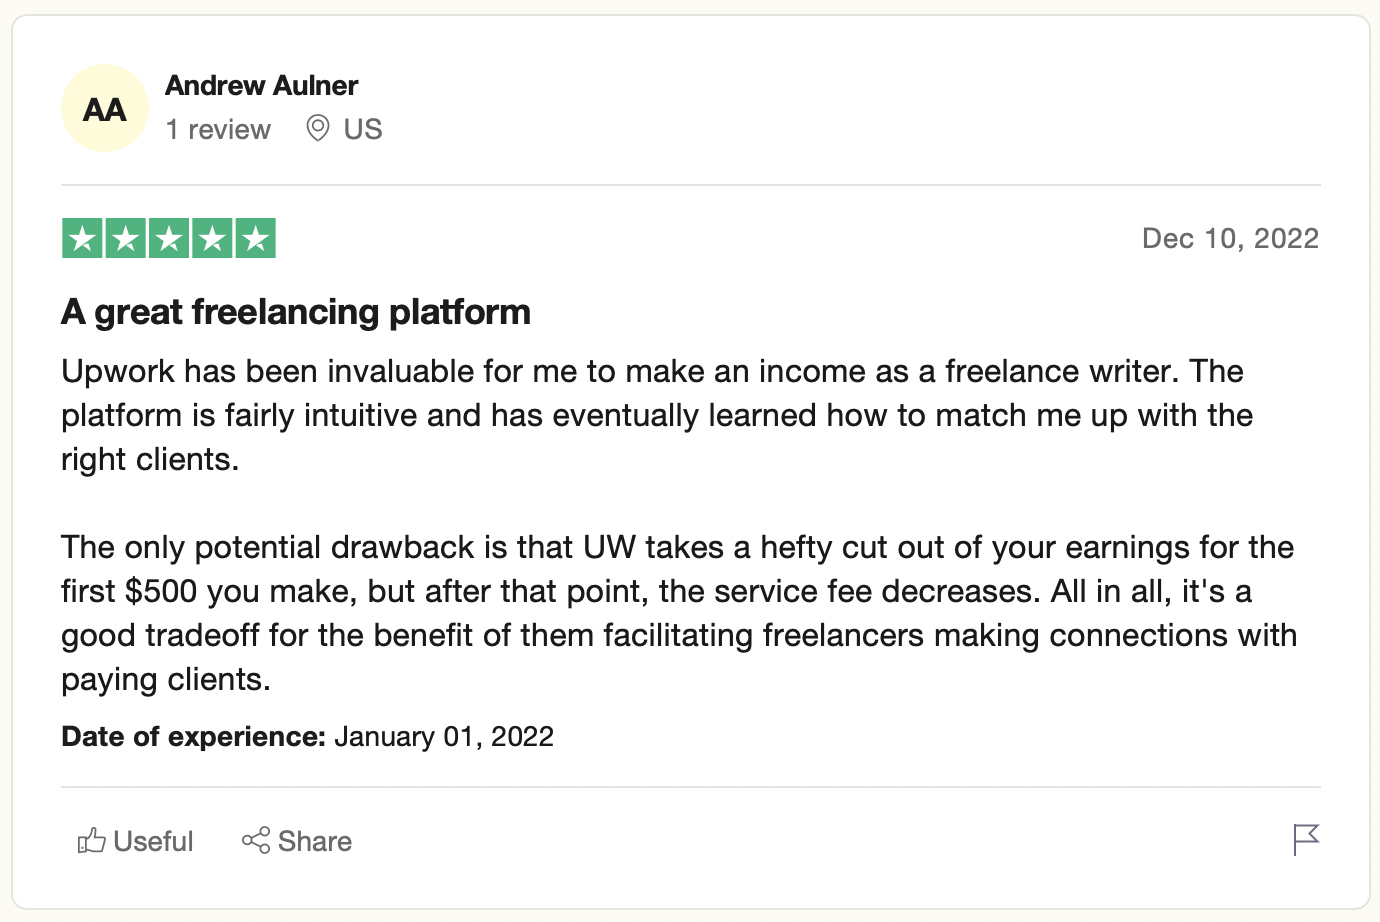 What are the benefits of being top rated on UpWork? - Quora